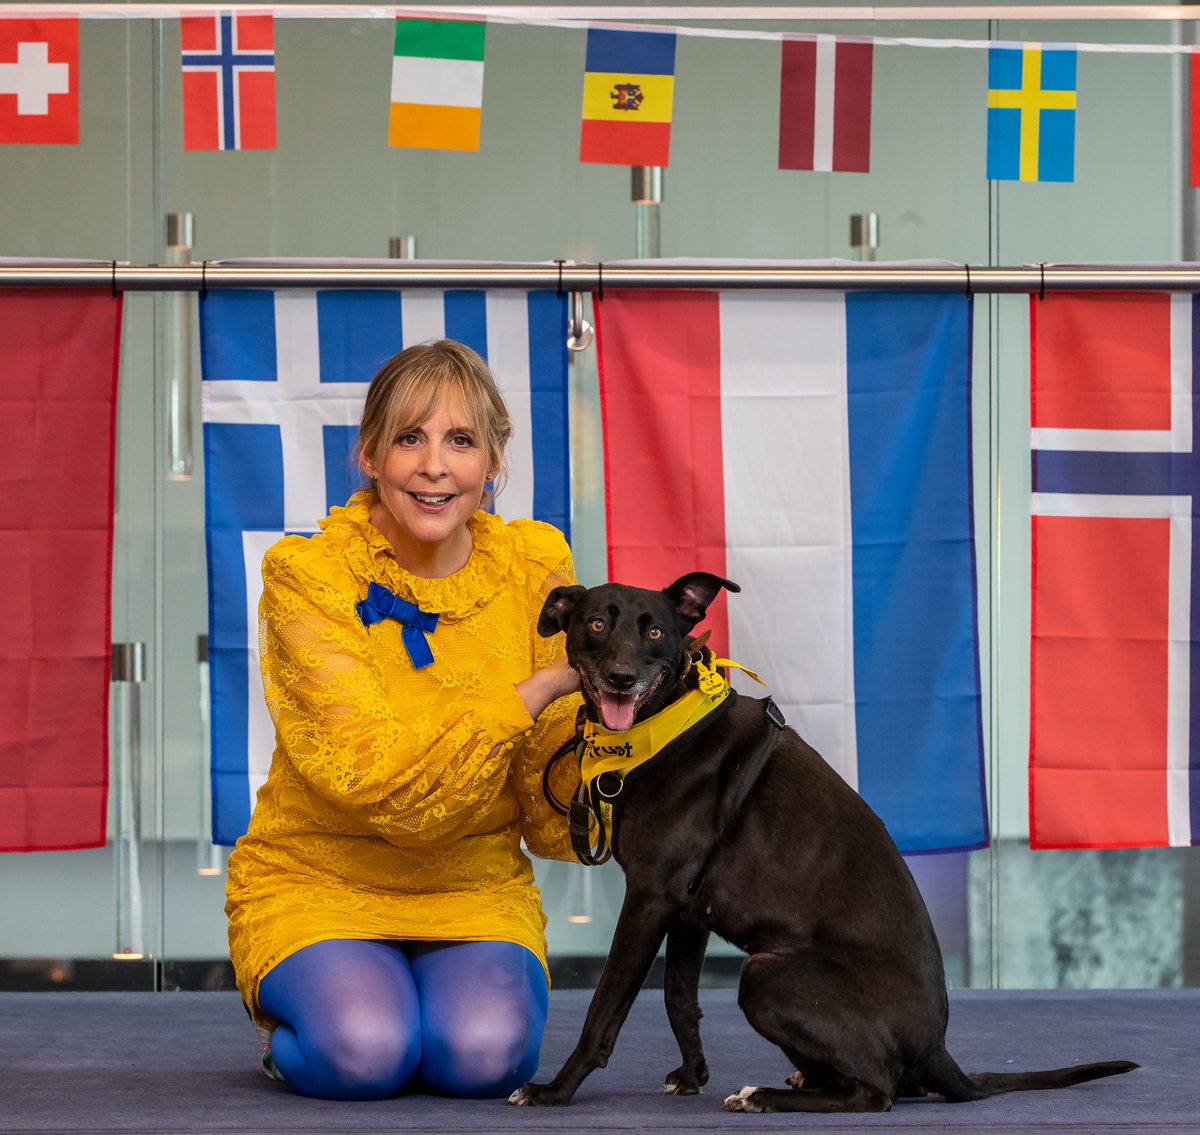 #Eurovision fever is building!🎶 #Eurovision2023 Song Contest commentator #MelGiedroyc joined @DogsTrust this week in #Liverpool to meet Betty, a #lurcher looking for her furever home📸⬇️

Find out more about Betty here ➡️dogstrust.org.uk/rehoming/dogs/… 🐶

#AdoptDontShop #DogsOfTwitter